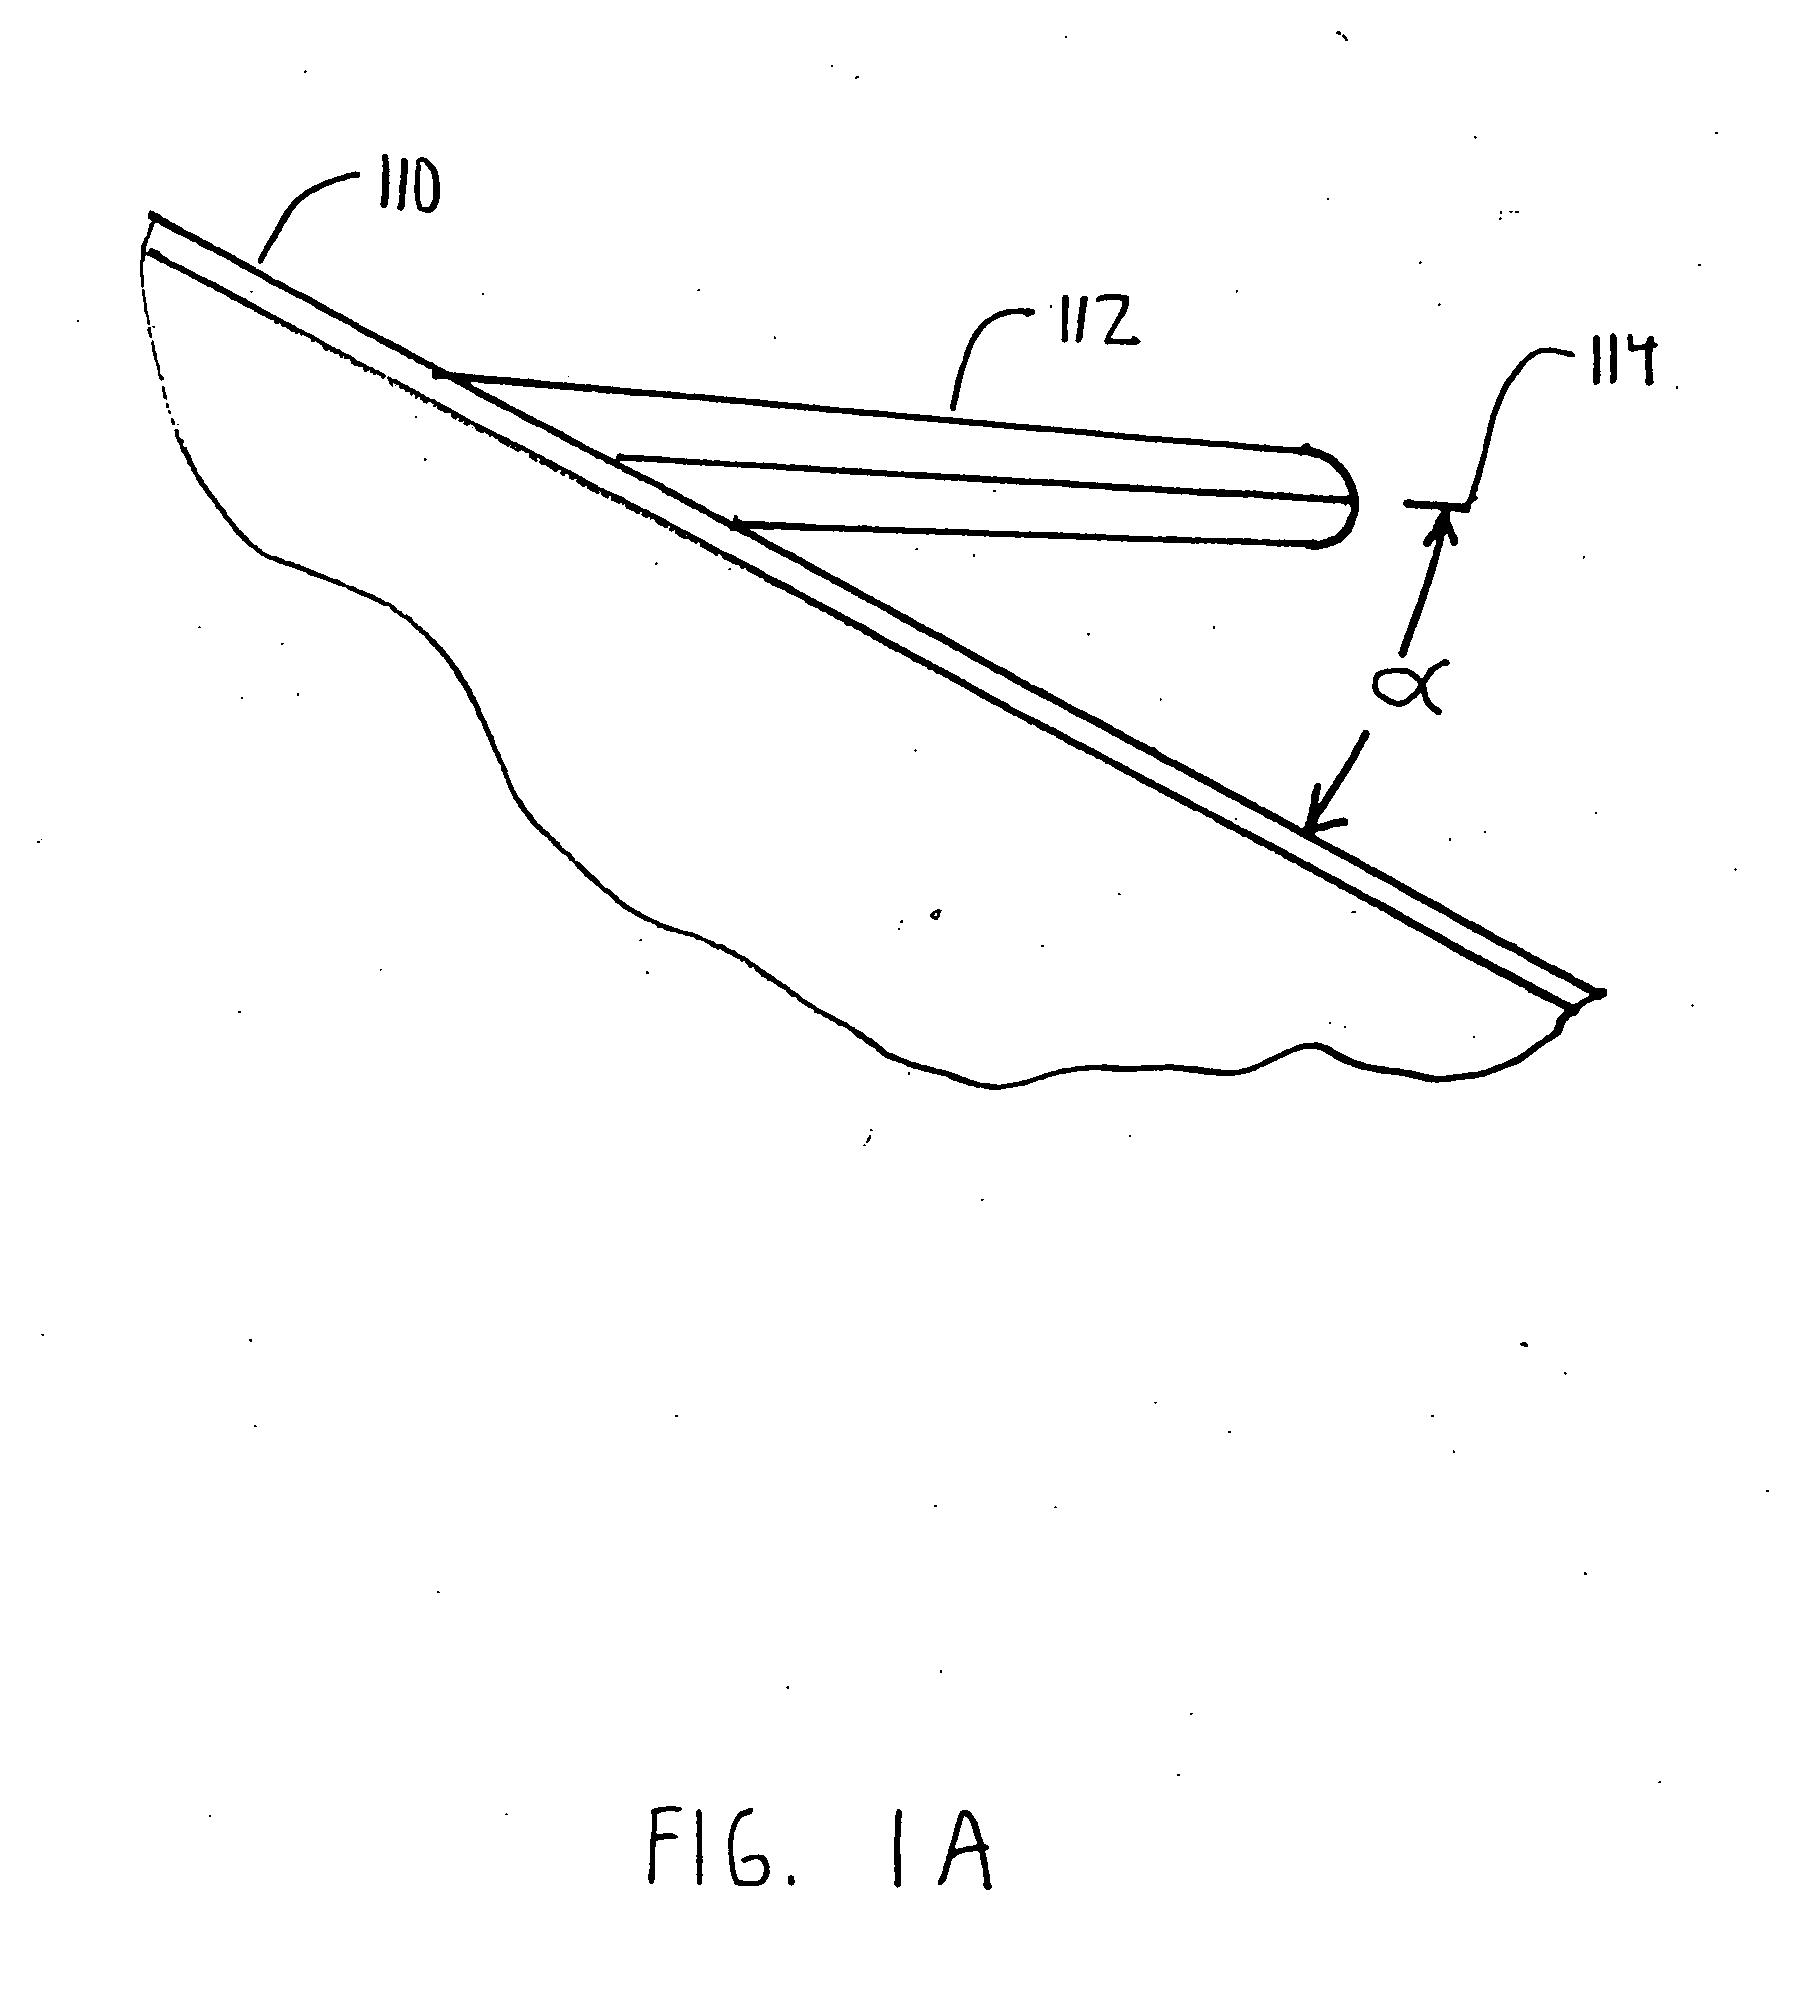 Intestine processing device and associated method